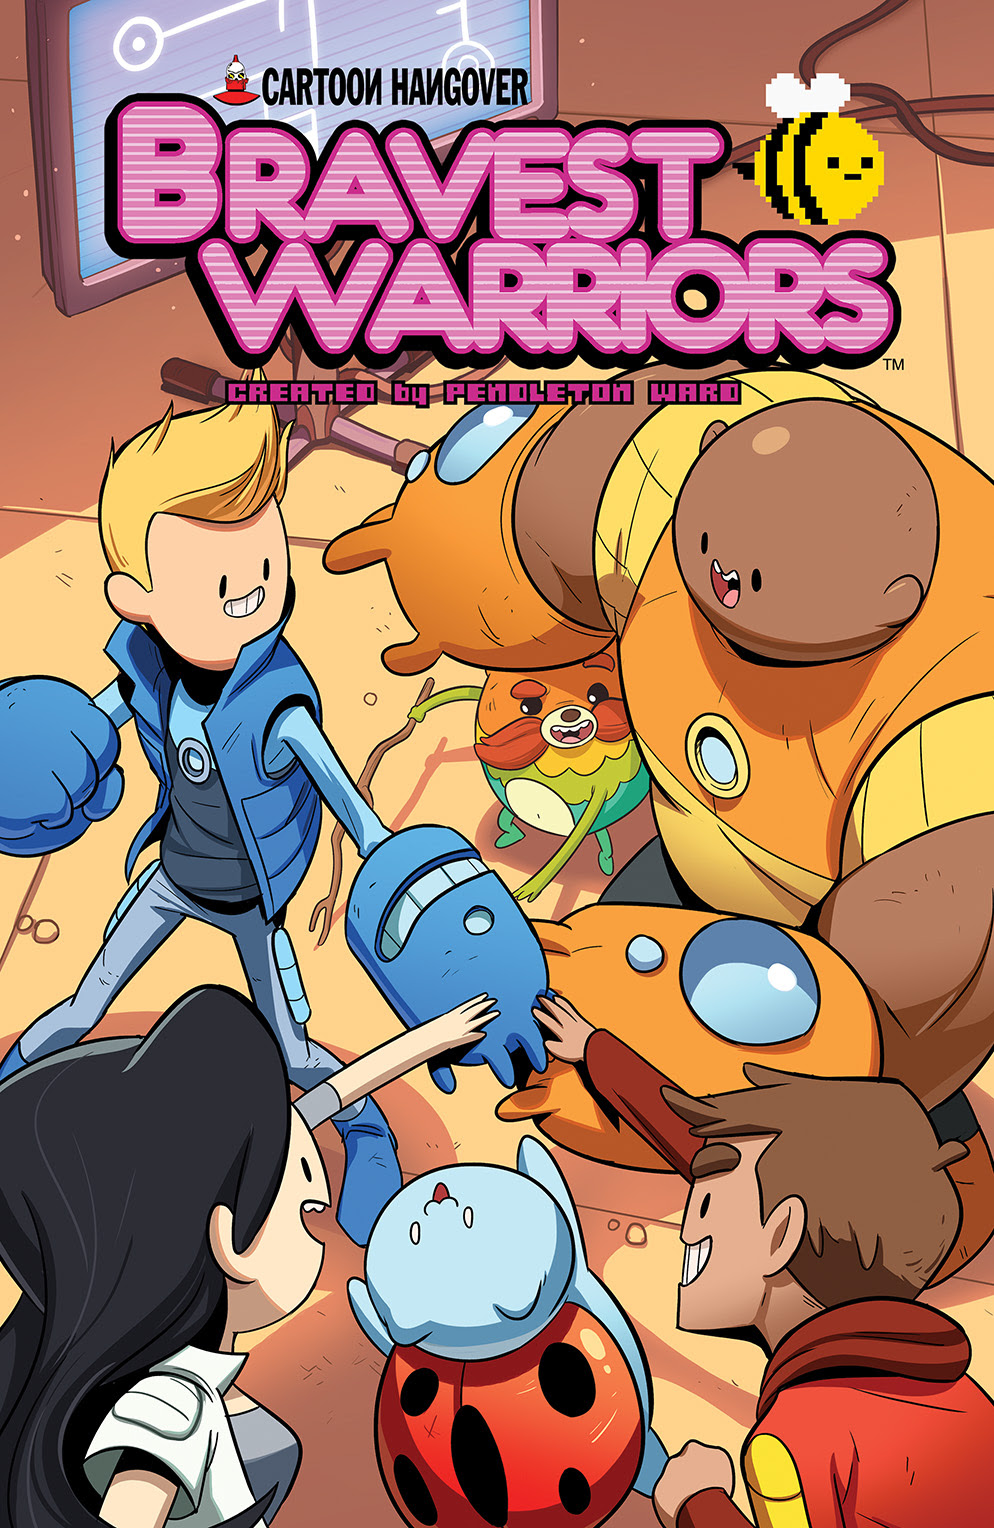 BRAVEST WARRIORS VOL. 3 TP Cover by Tyson Hesse